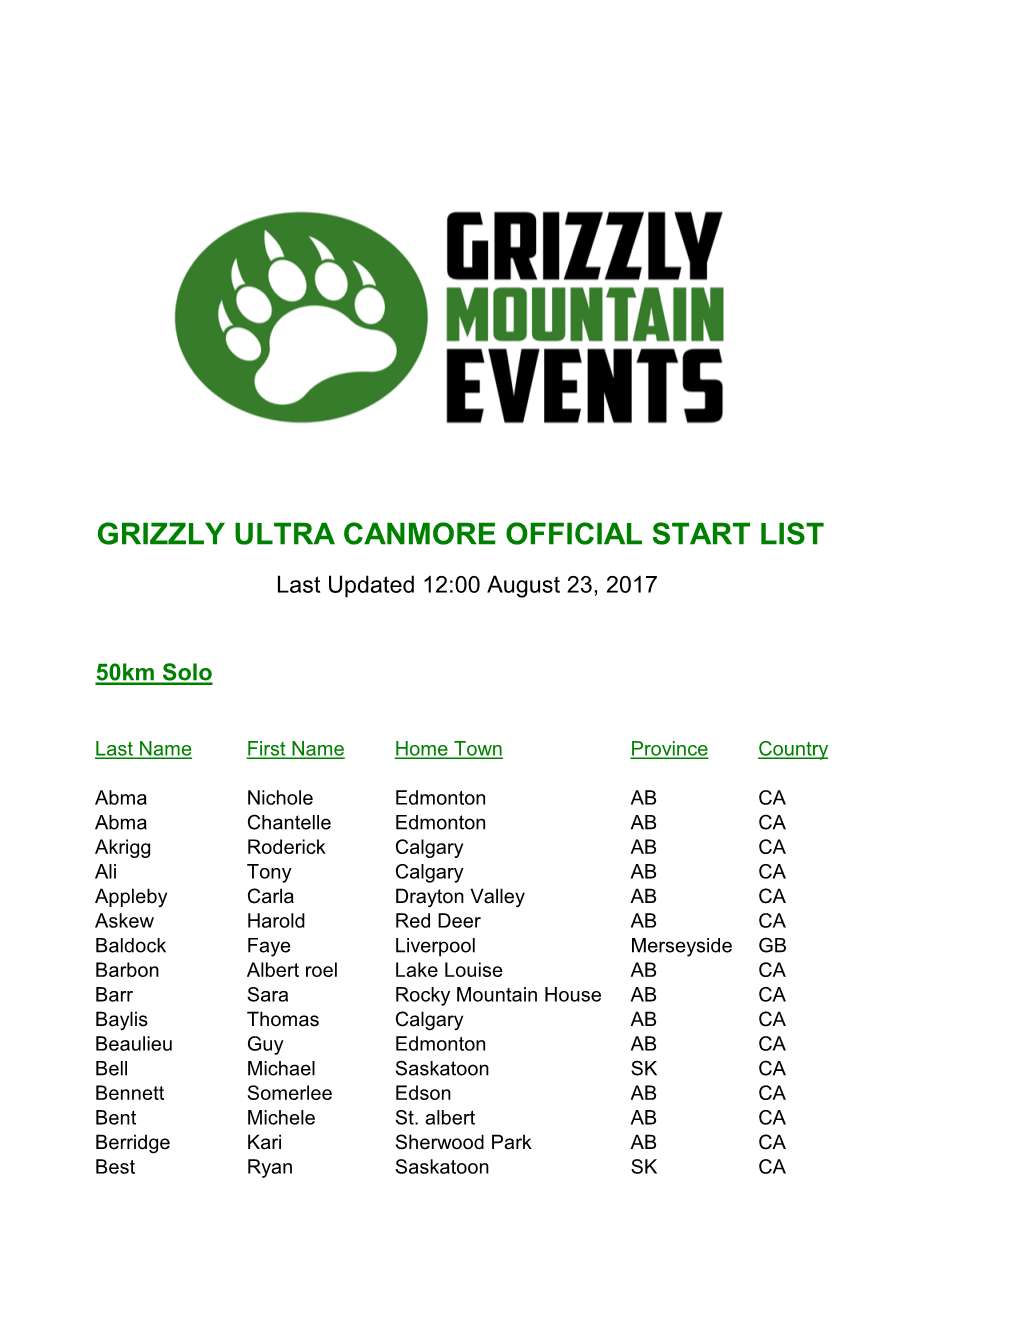 GRIZZLY ULTRA CANMORE OFFICIAL START LIST Last Updated 12:00 August 23, 2017